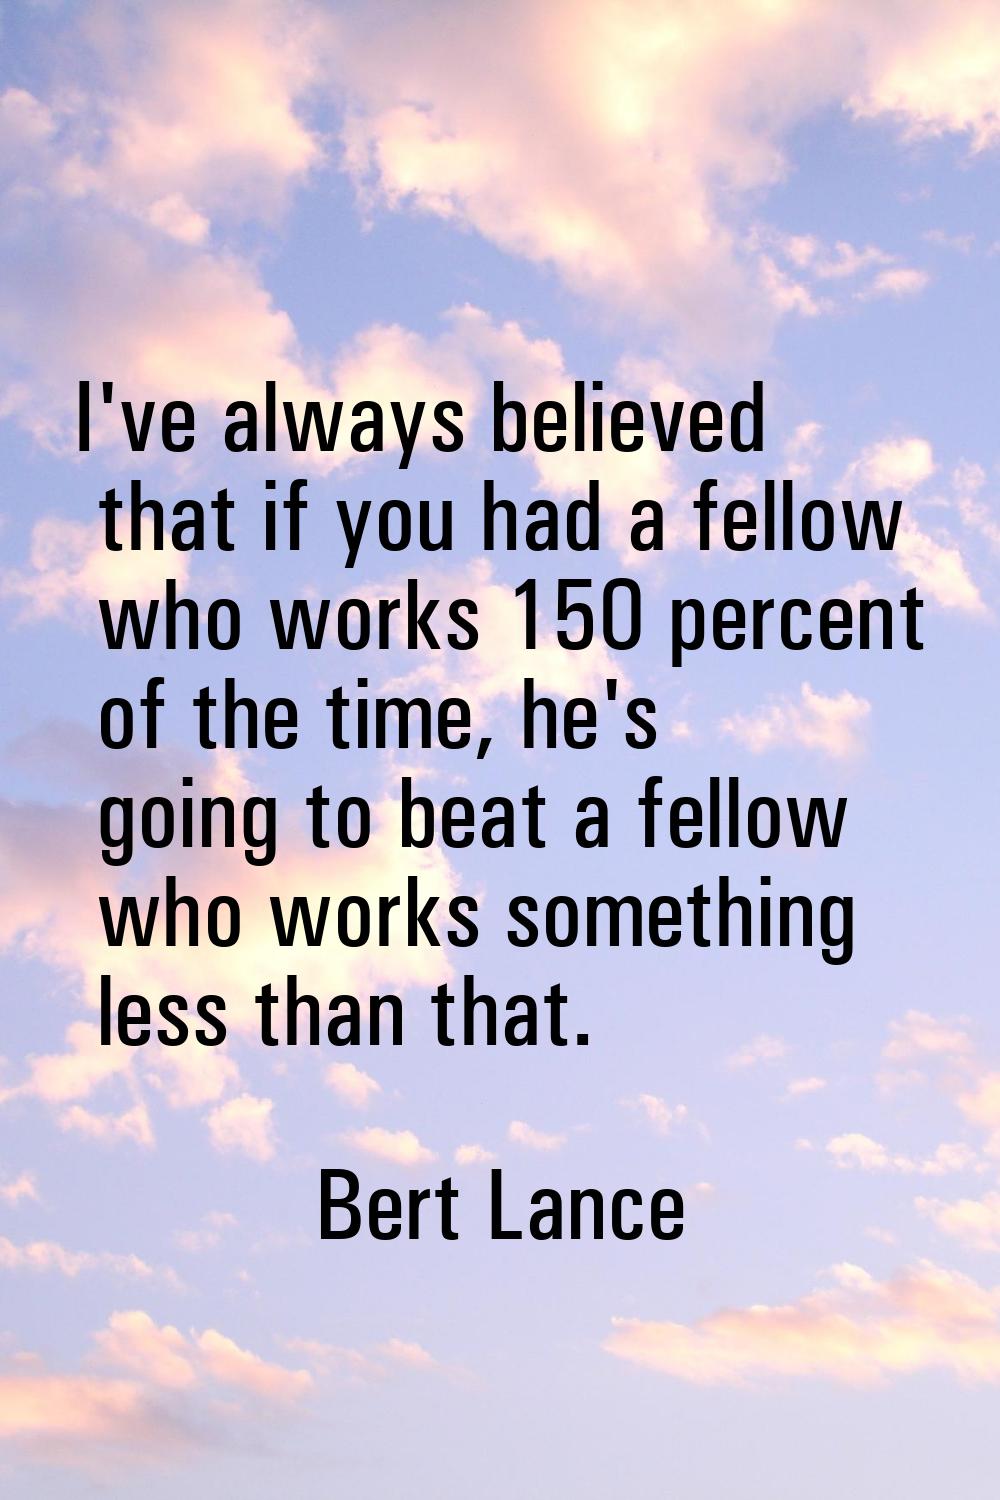 I've always believed that if you had a fellow who works 150 percent of the time, he's going to beat